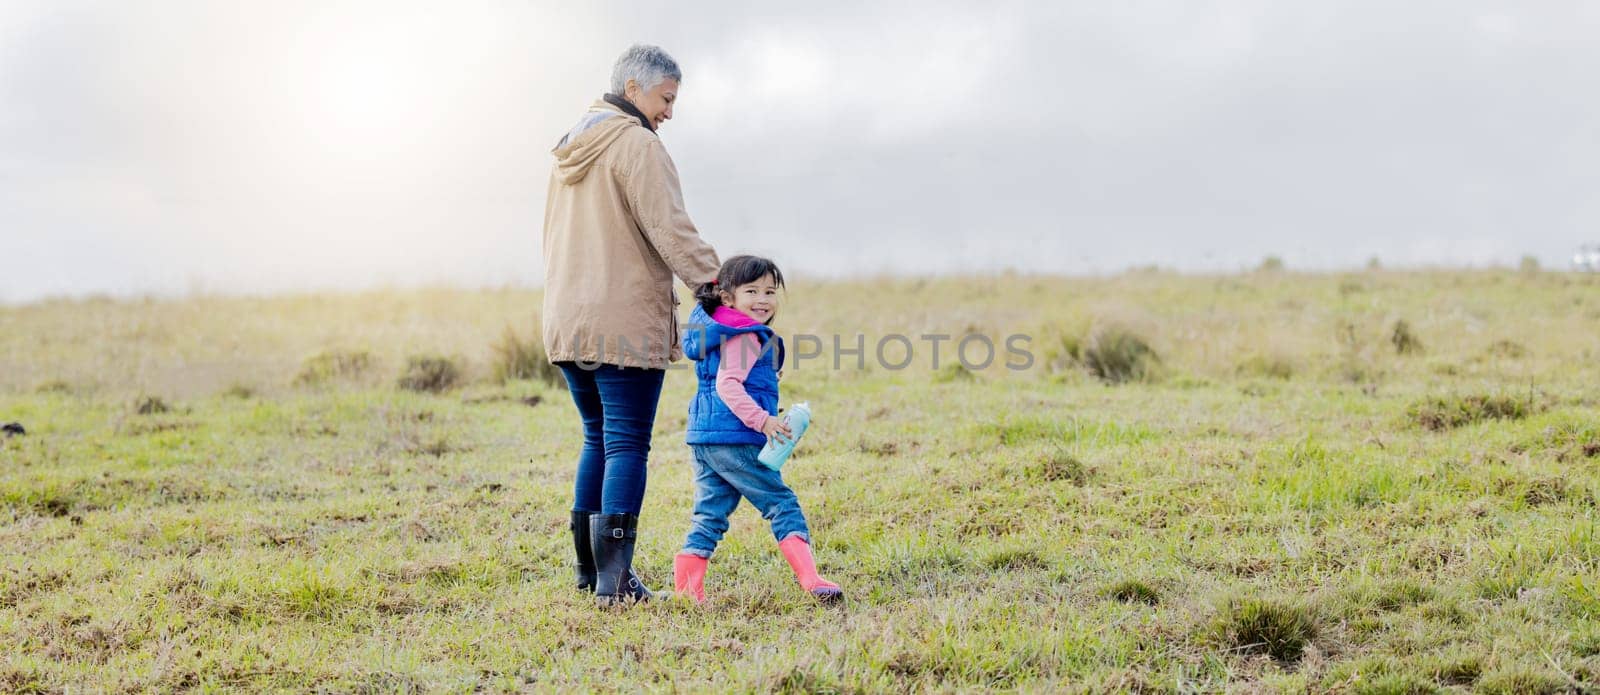 Grandmother, walking girl and nature park of a kid with senior woman in the countryside. Outdoor field, grass and elderly female with child on a family adventure on vacation with happiness and fun by YuriArcurs